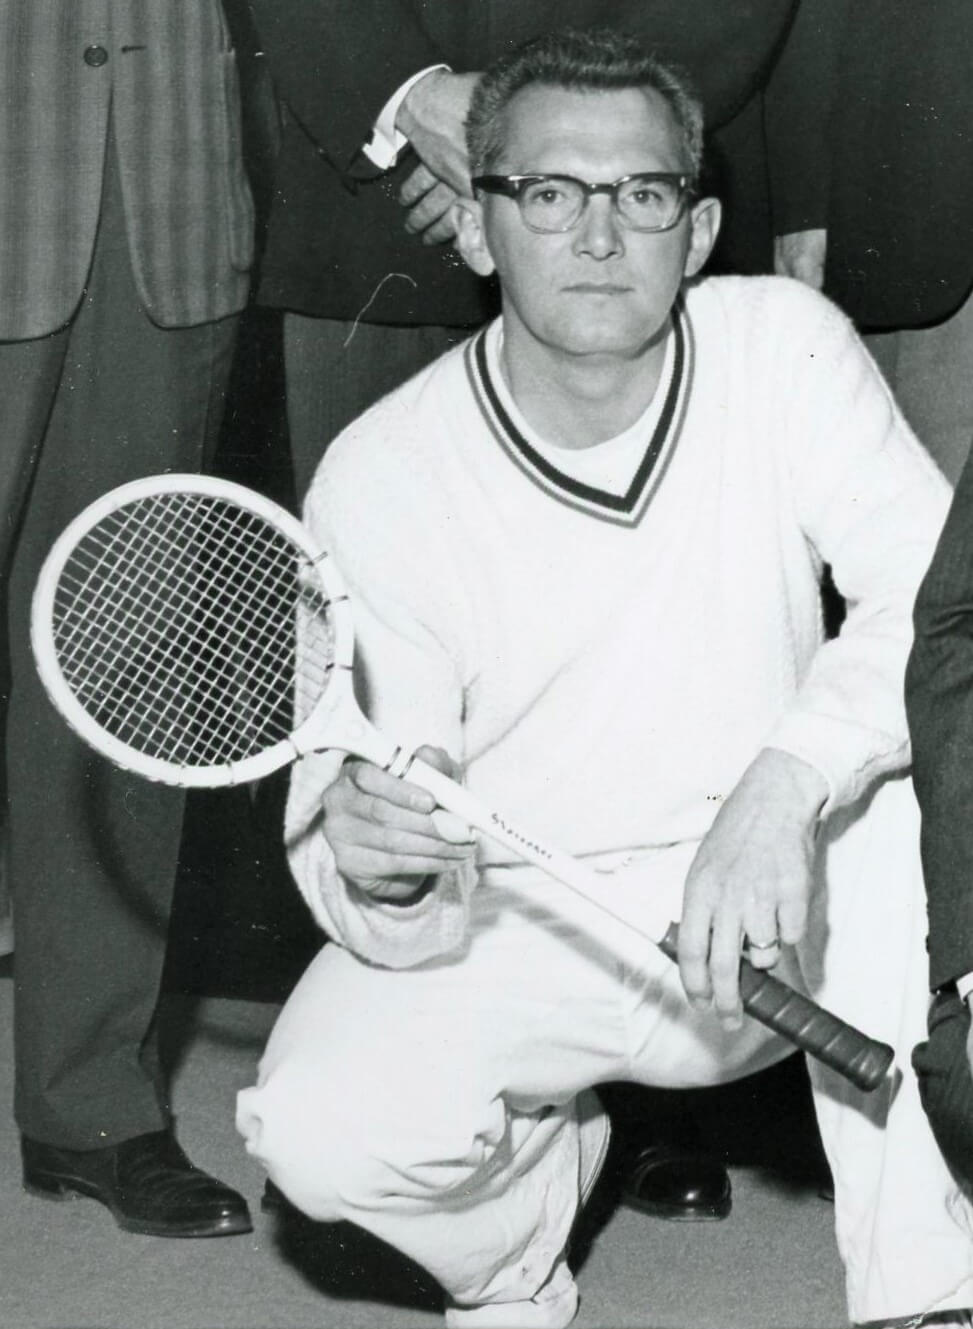 old photo of a man posing with a racquet